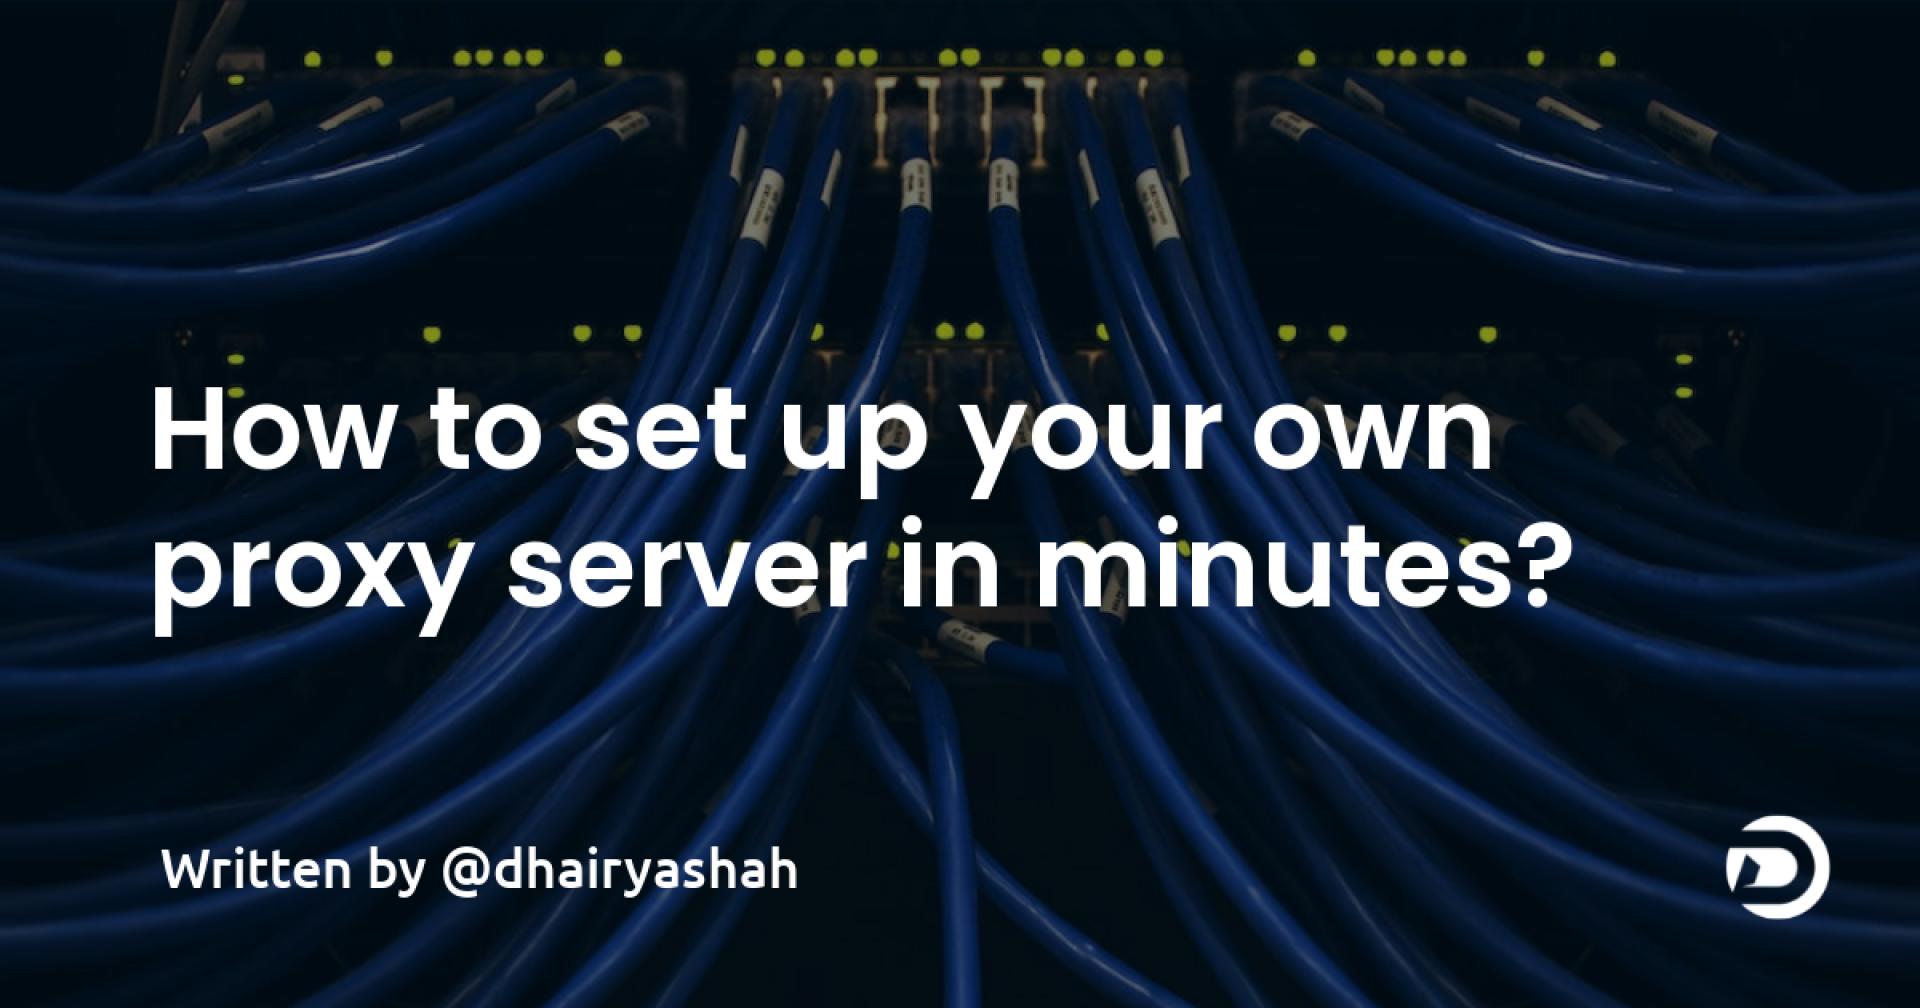 How to set up your own proxy server in minutes?